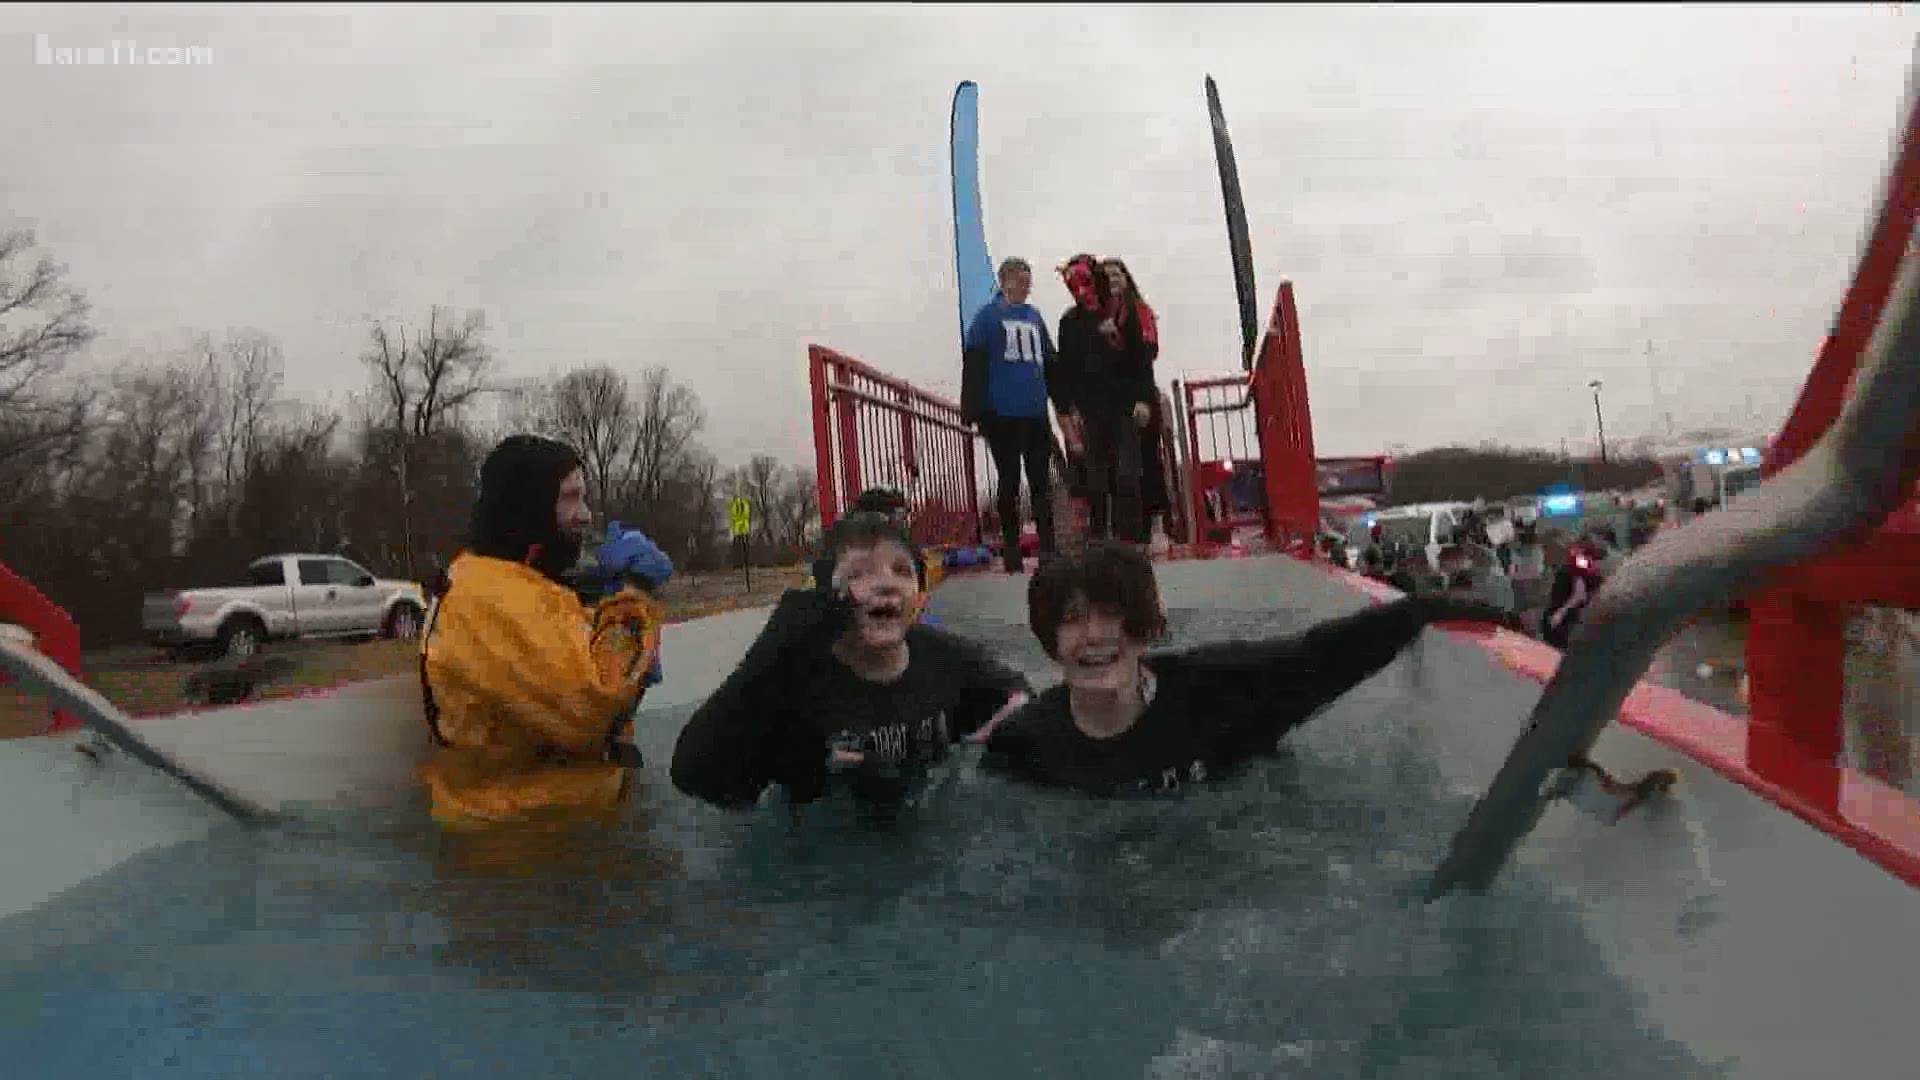 The Polar Plunge is now also mobile thanks to the "Plungester," which will be used at events across the state to benefit Special Olympics Minnesota.